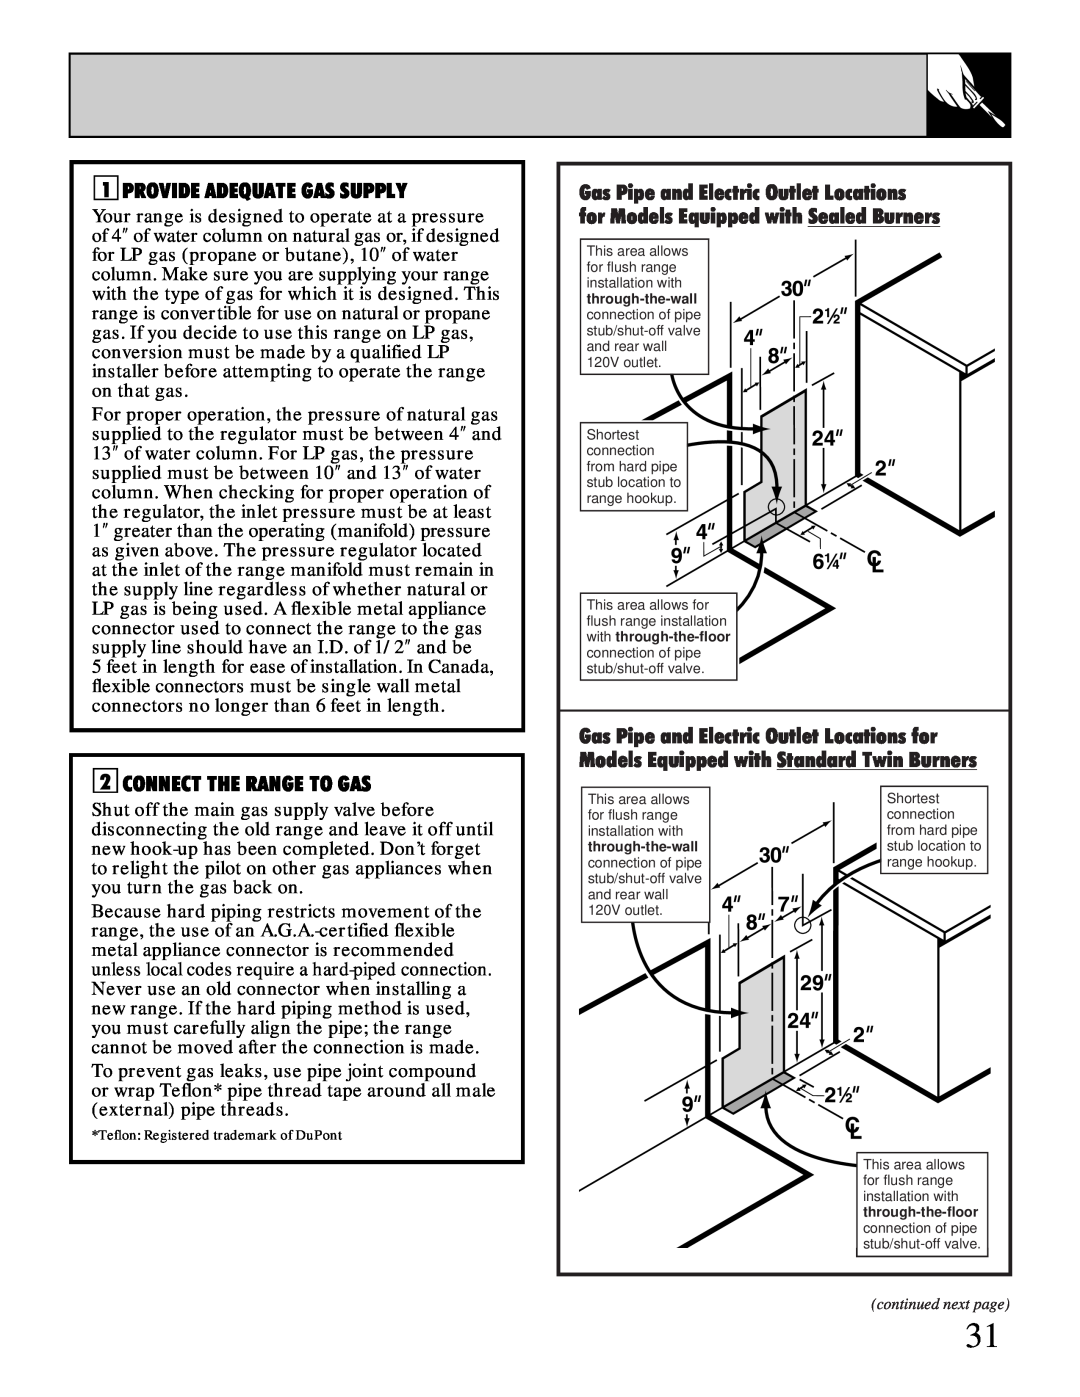 GE XL44TM installation instructions Provide Adequate Gas Supply, Connect The Range To Gas, through-the-wall 